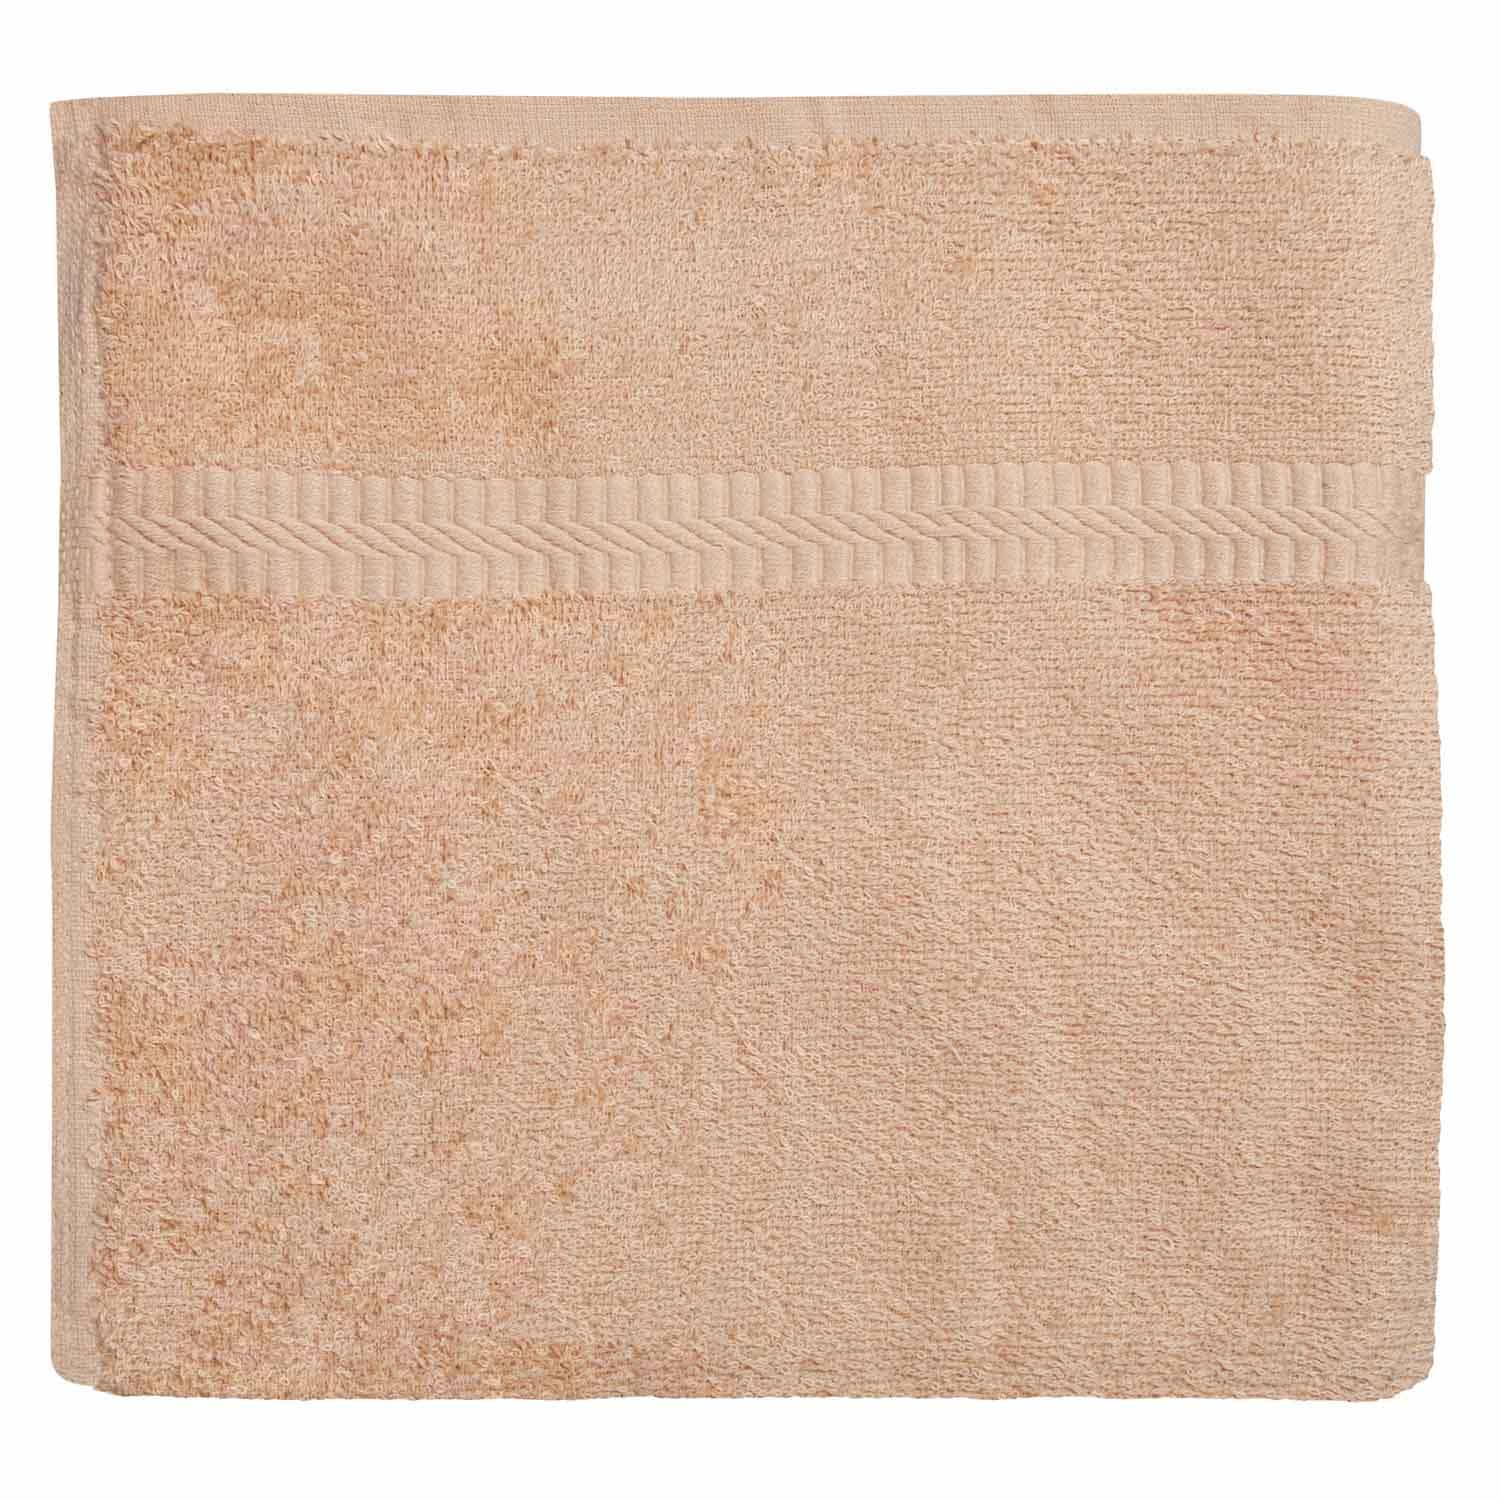 American Dawn | 16X30 Inch Beige With Dobby Border Healthcare Towel | Hand Towel